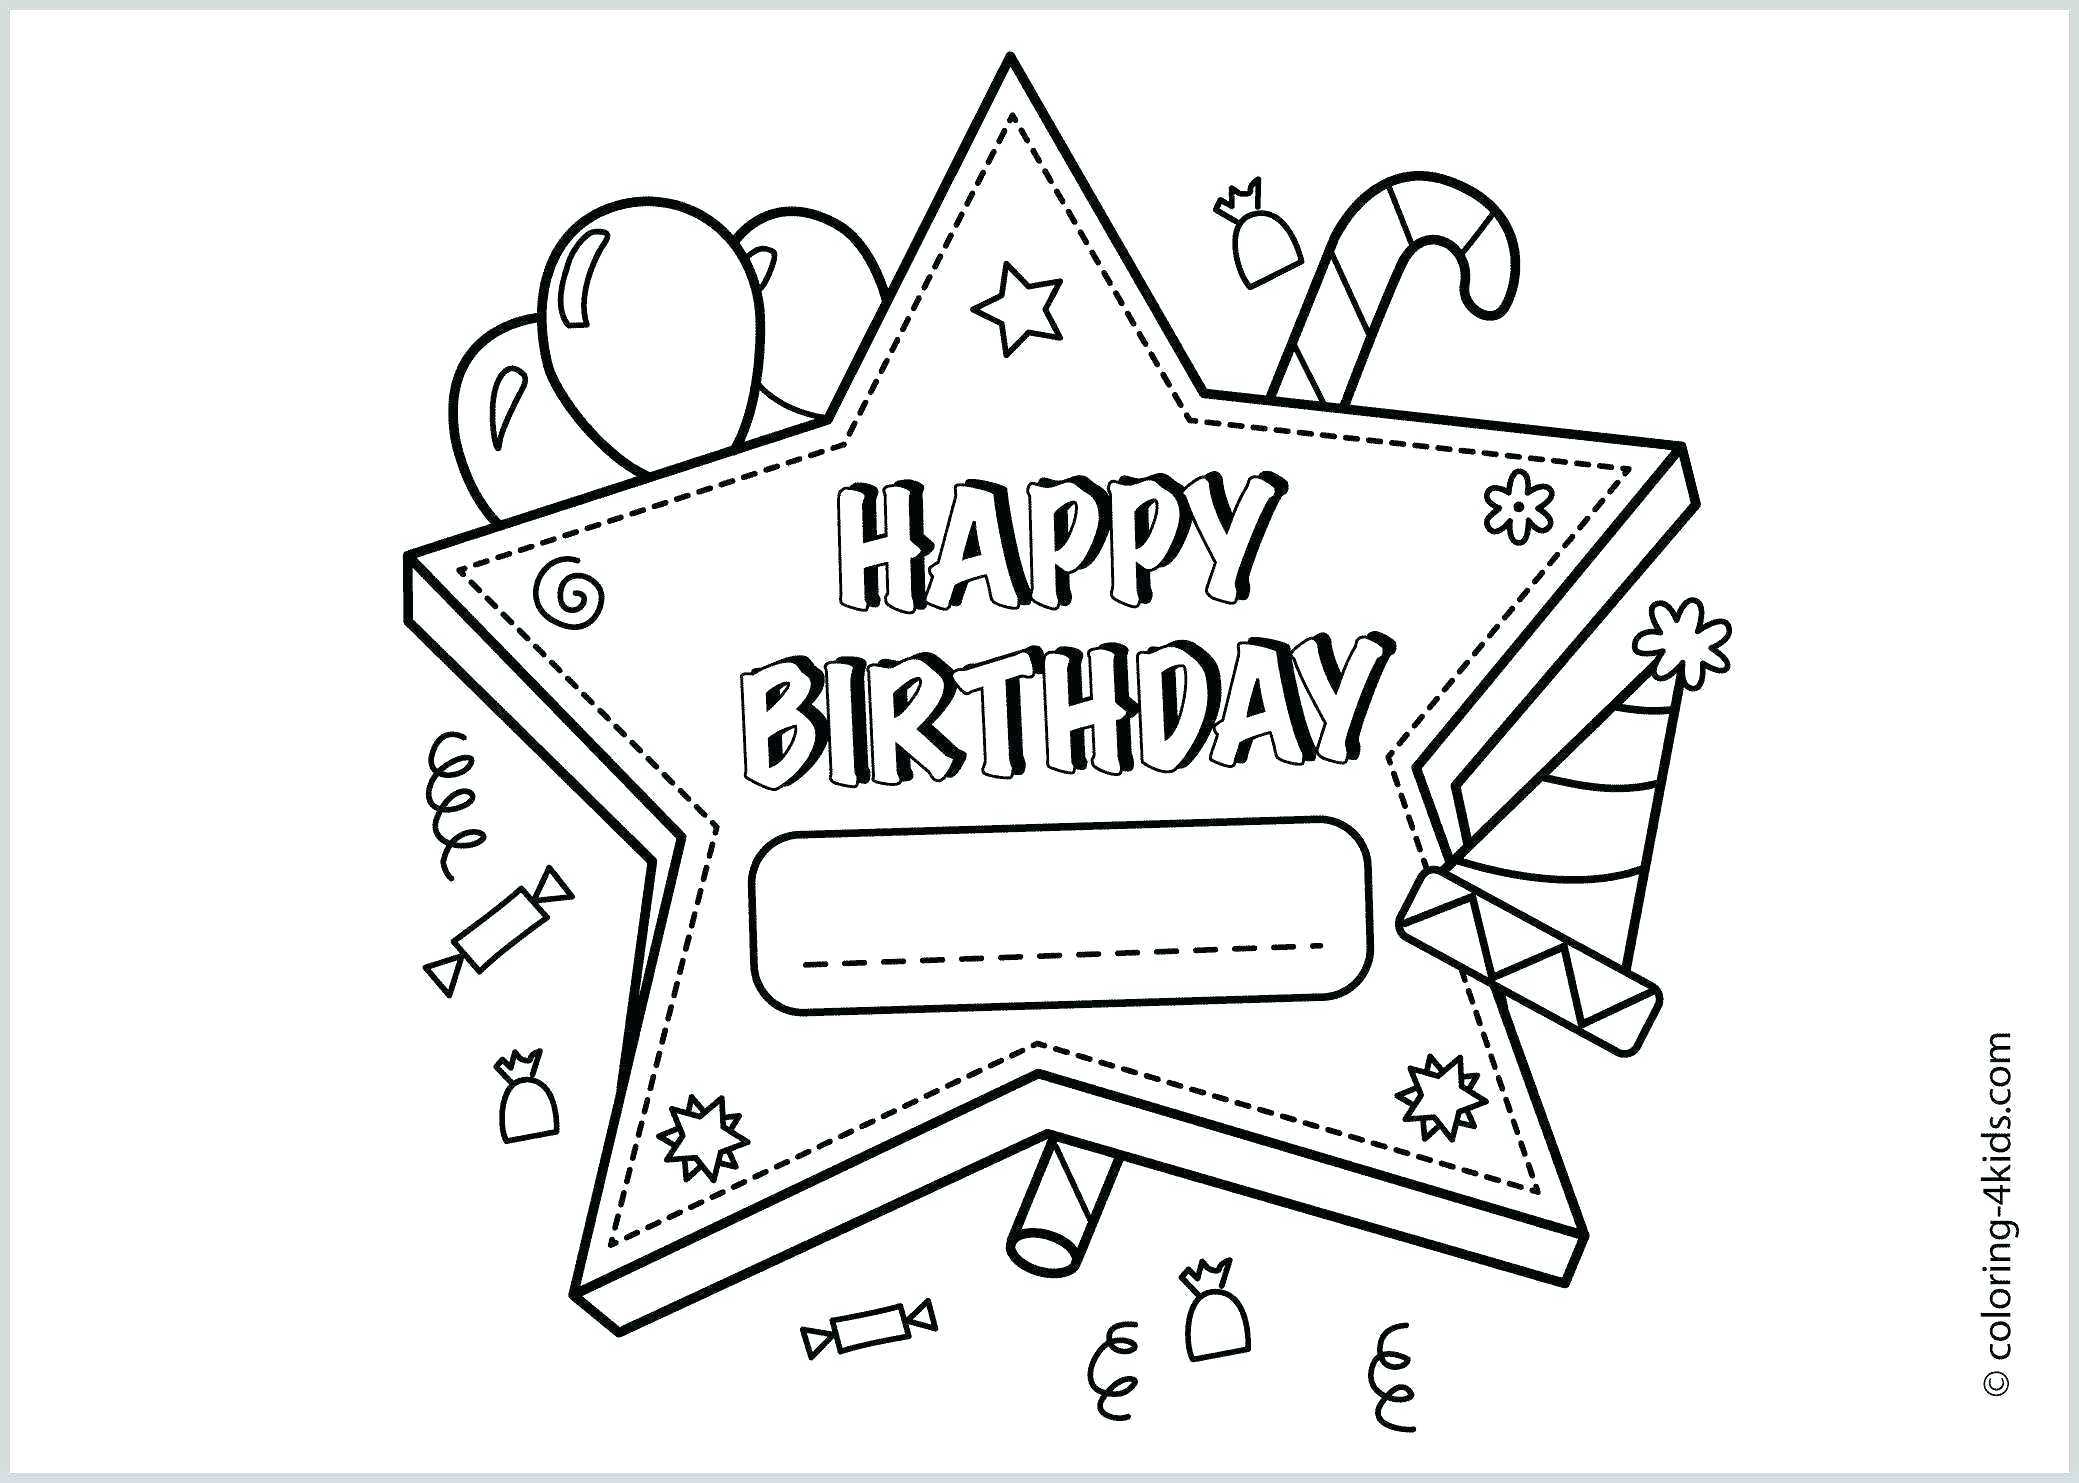 Coloring Pages : Coloring Printable Birthday Amazing Card In Template For Cards To Print Free